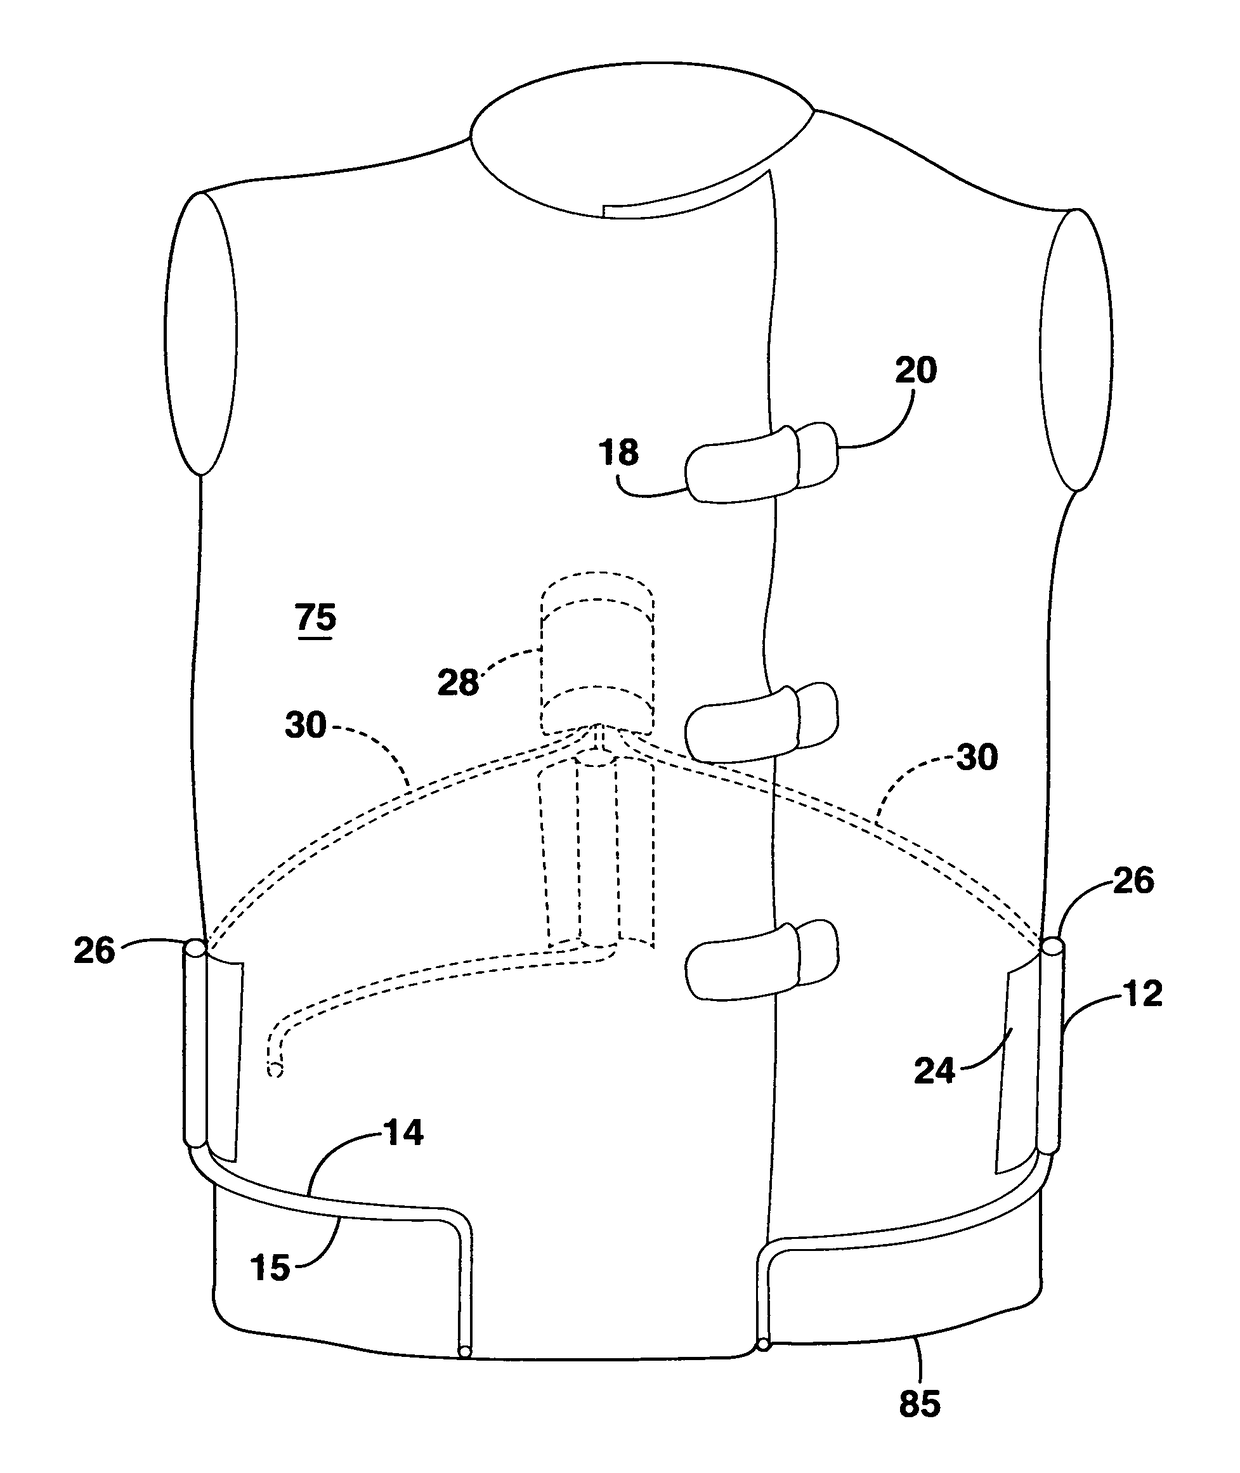 Supported radiation protective garment